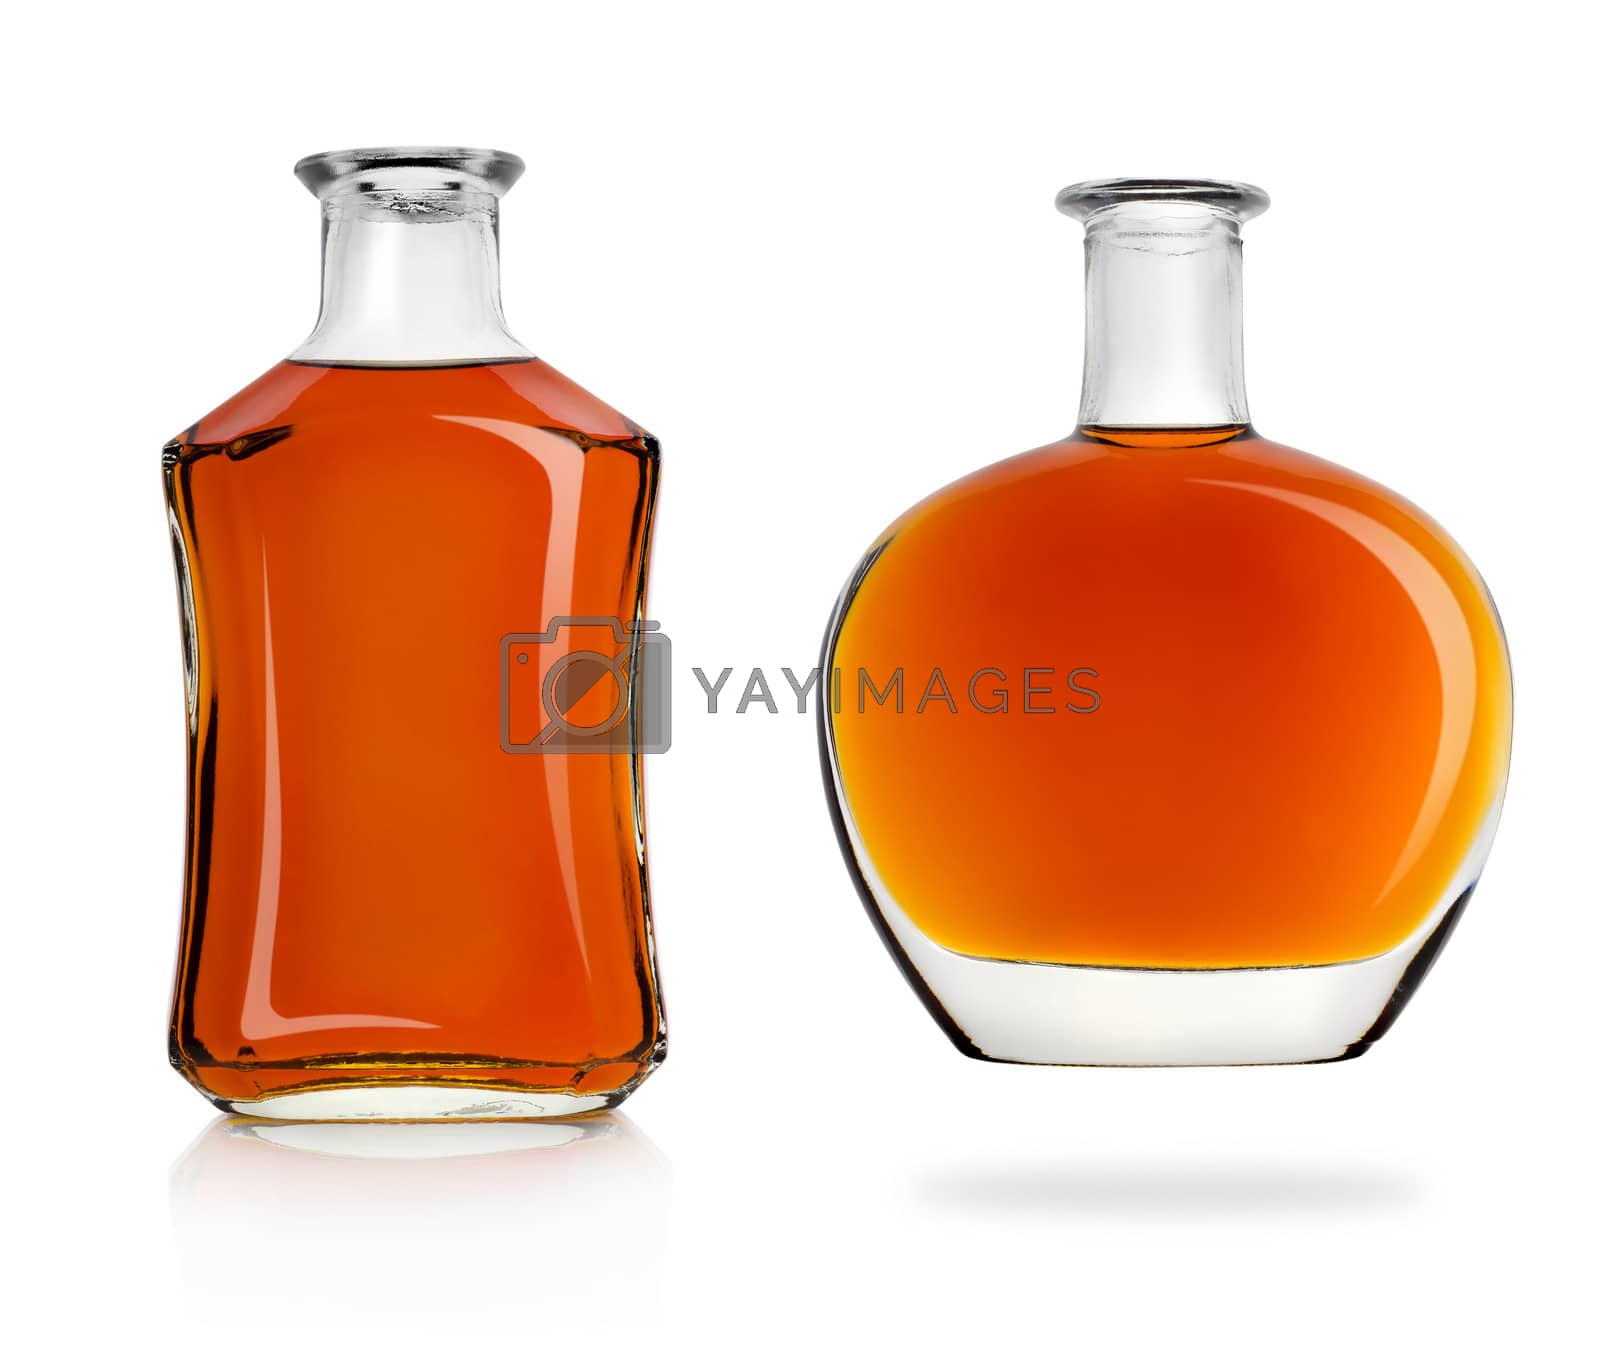 Royalty free image of Bottles of cognac by Givaga